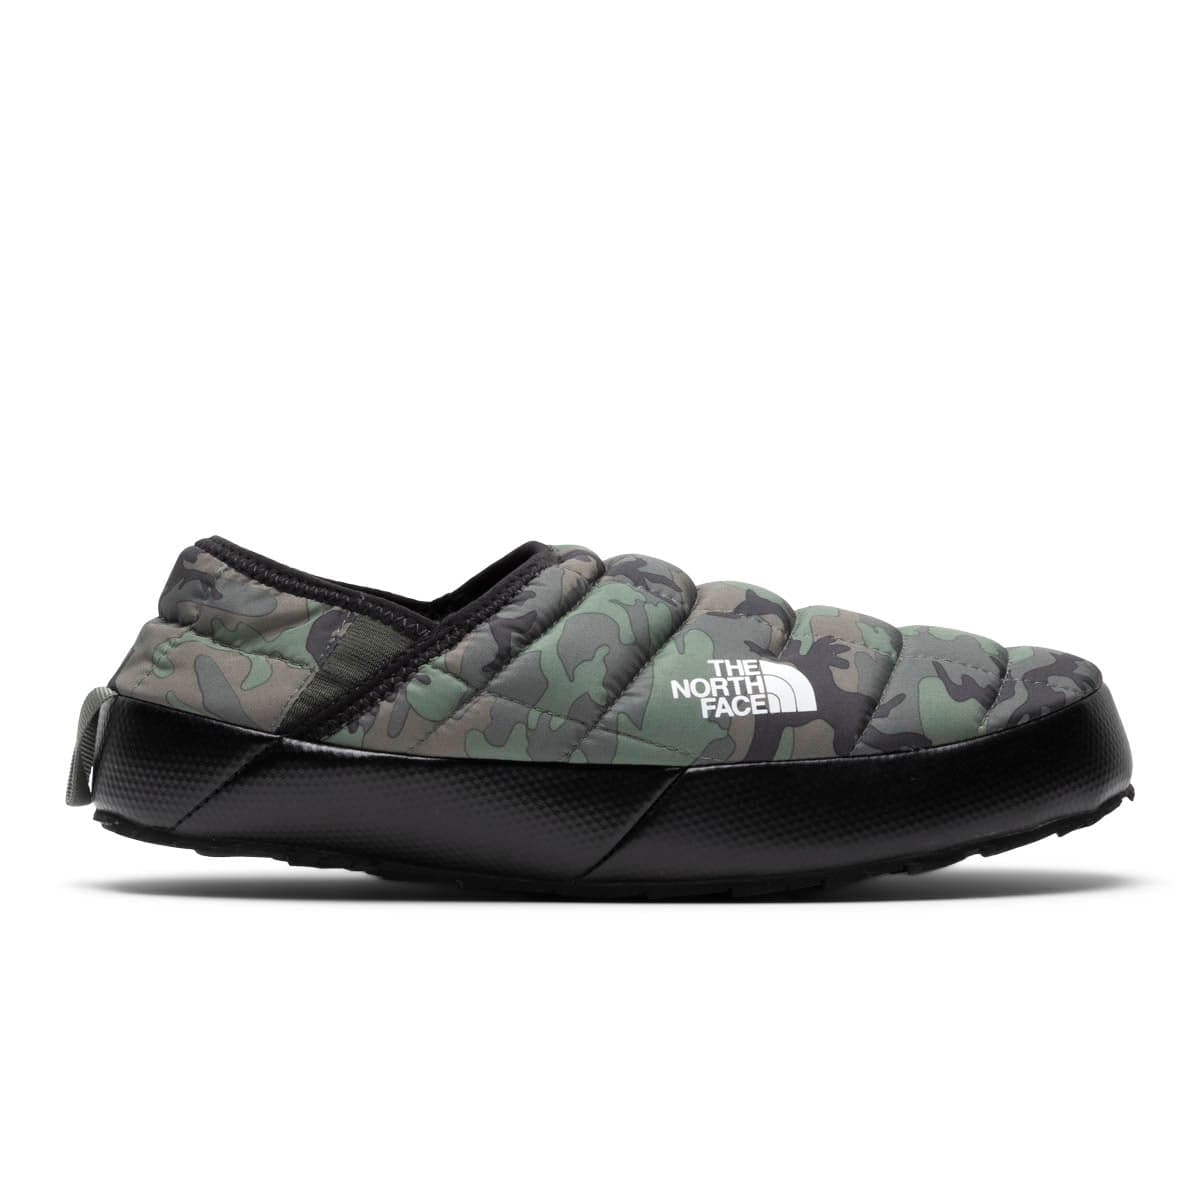 The North Face Sandals THERMOBALL TRACTION MULE V